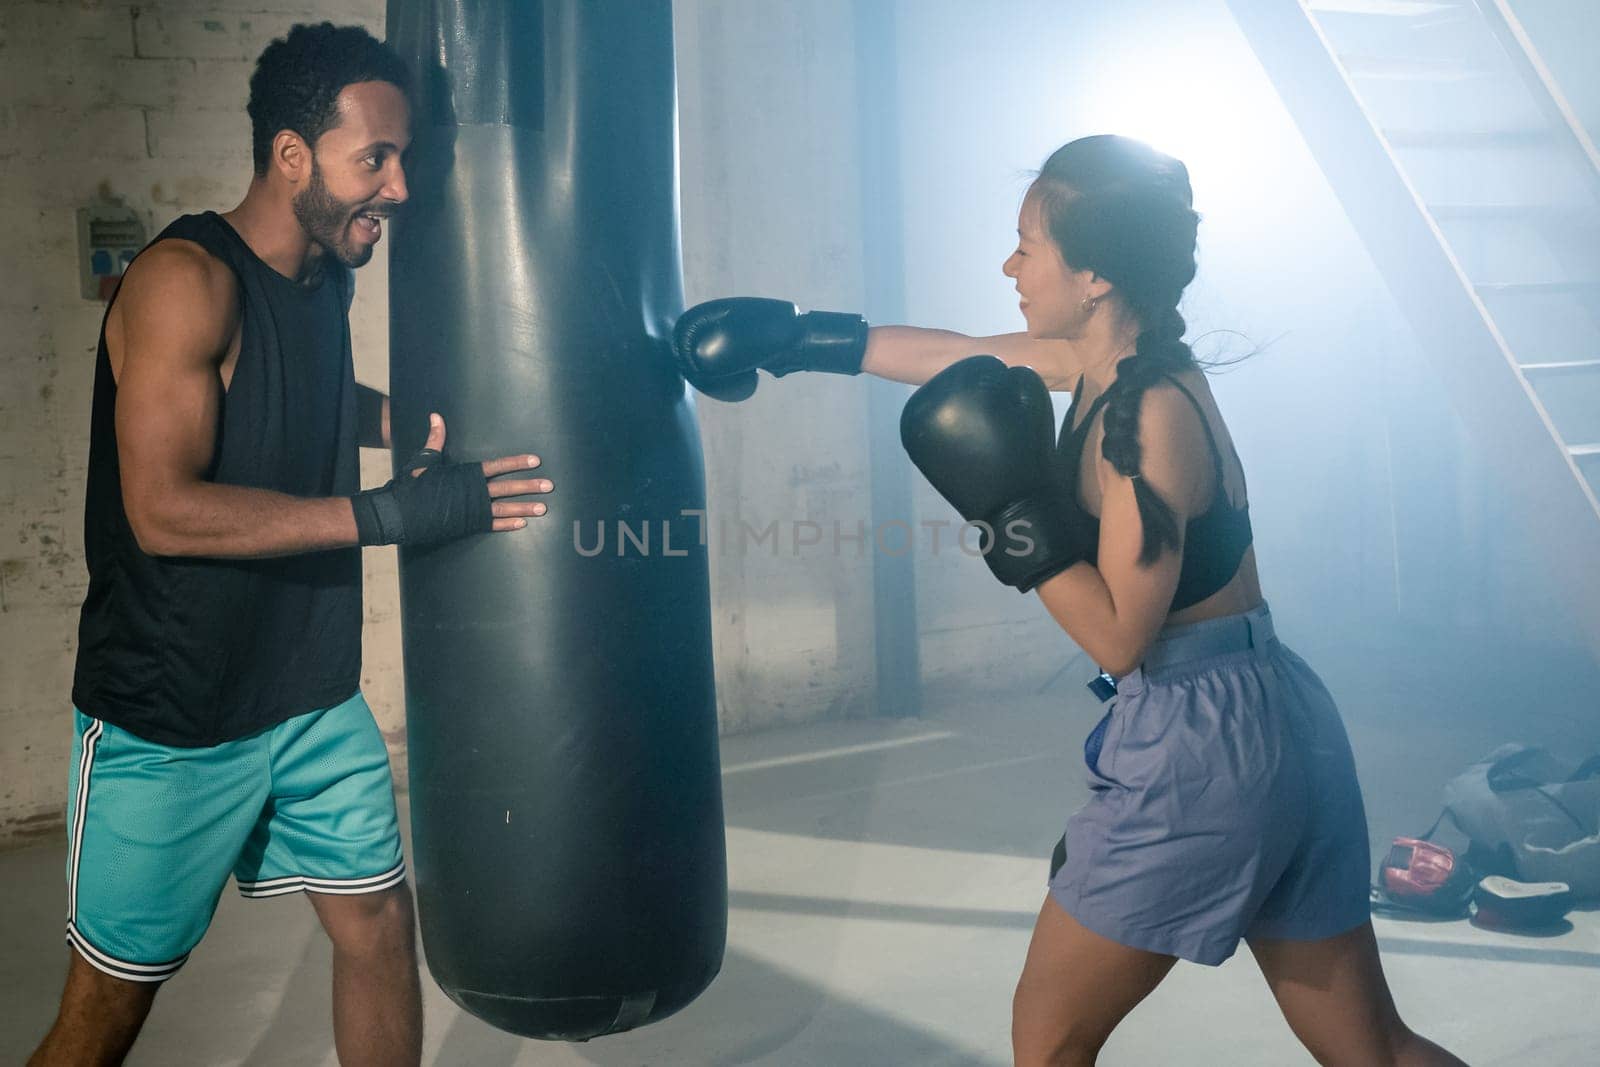 Fit and Strong Multicultural Couple Practicing Boxing Together in the Gym, Promoting Health and Unit by PaulCarr